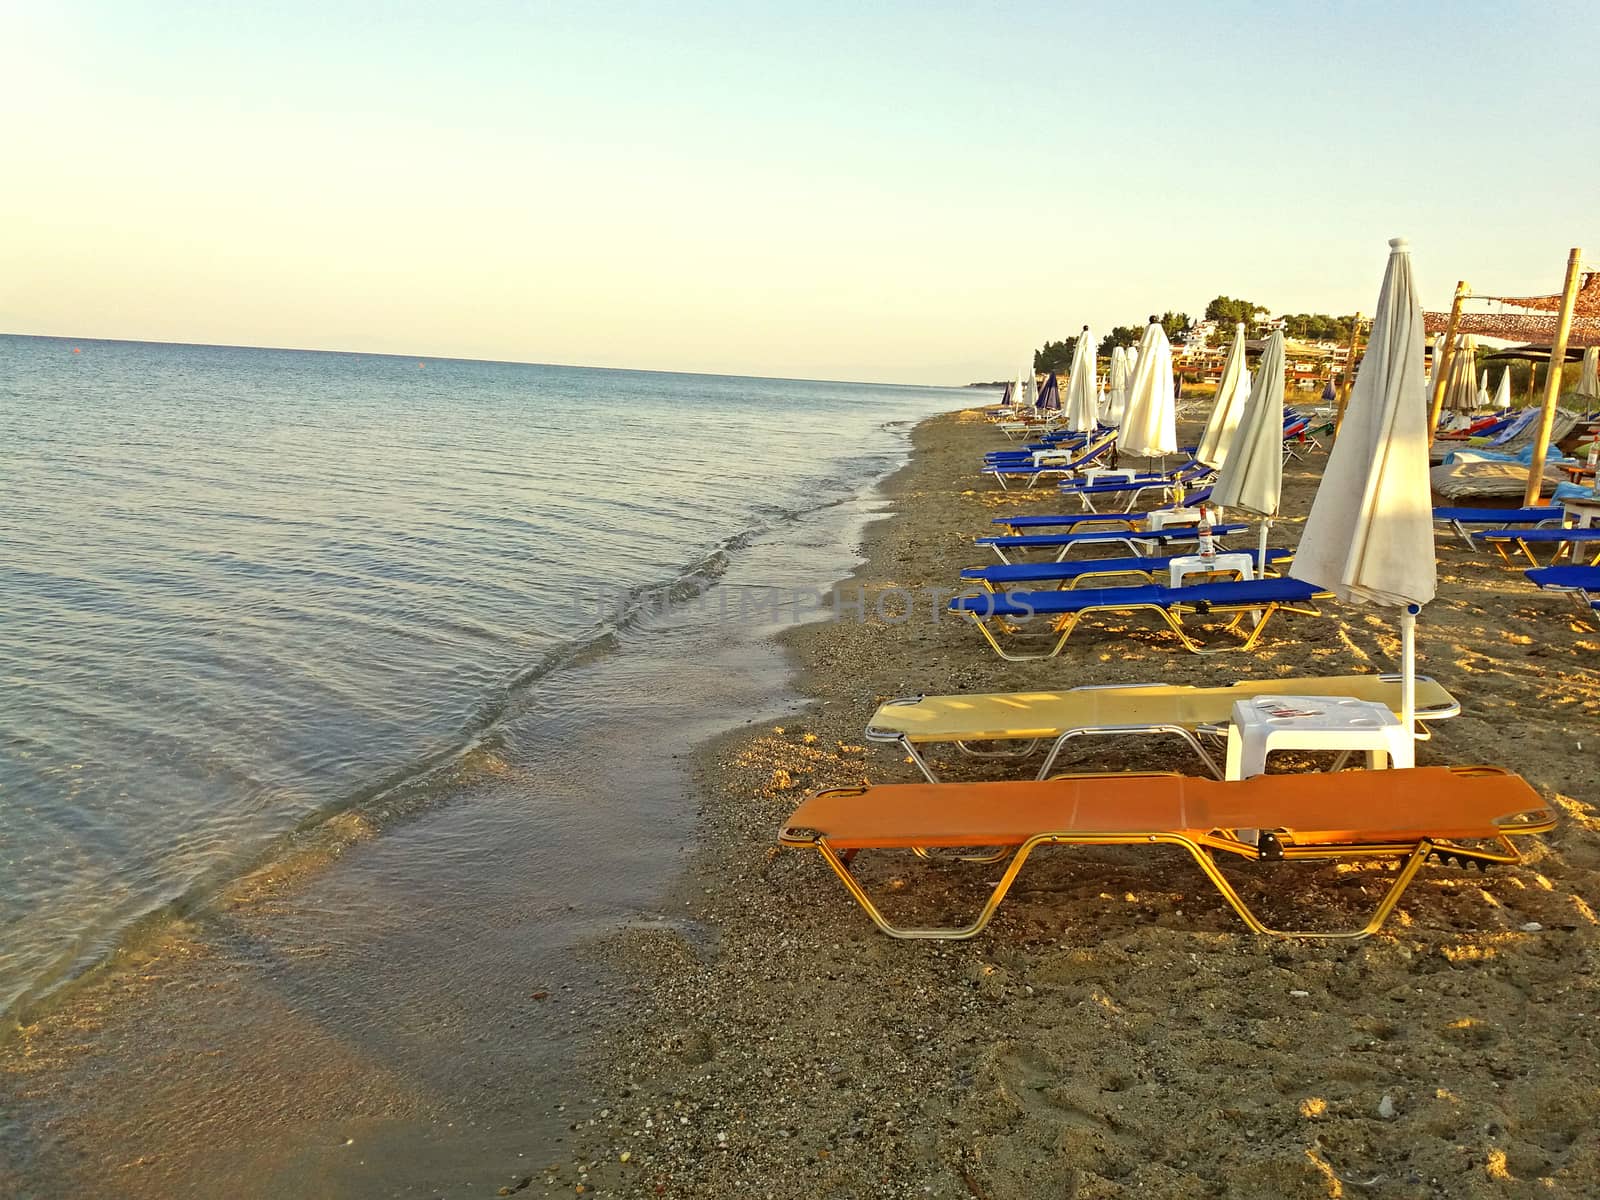 Sunbeds at the shore of the Greek Mediterranean Sea, Greek beach at sunrise by Mindru